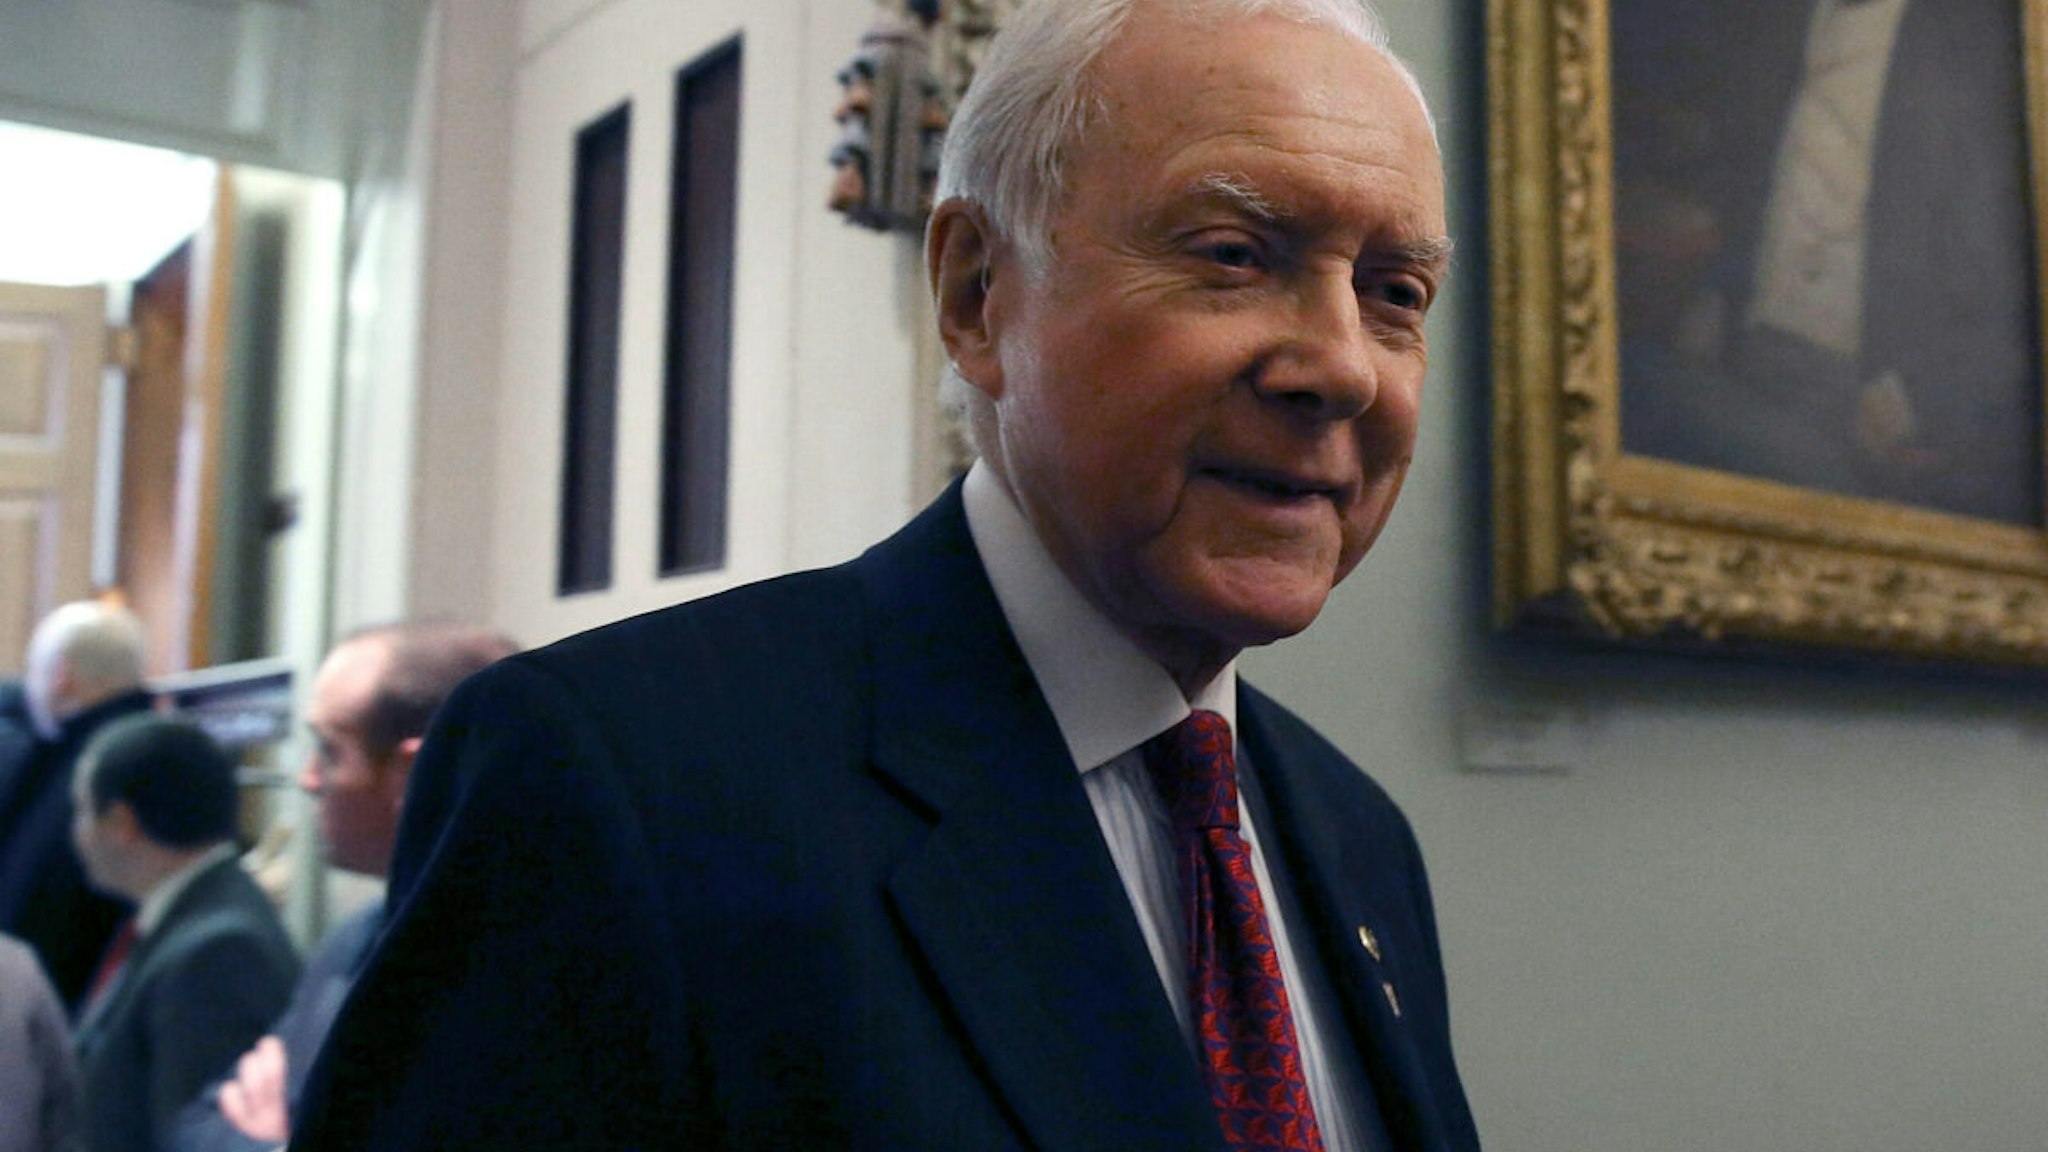 Sen. Orrin Hatch (R-UT) leaves the Senate Republican policy luncheon, on Capitol Hill February 23, 2016 in Washington, DC.